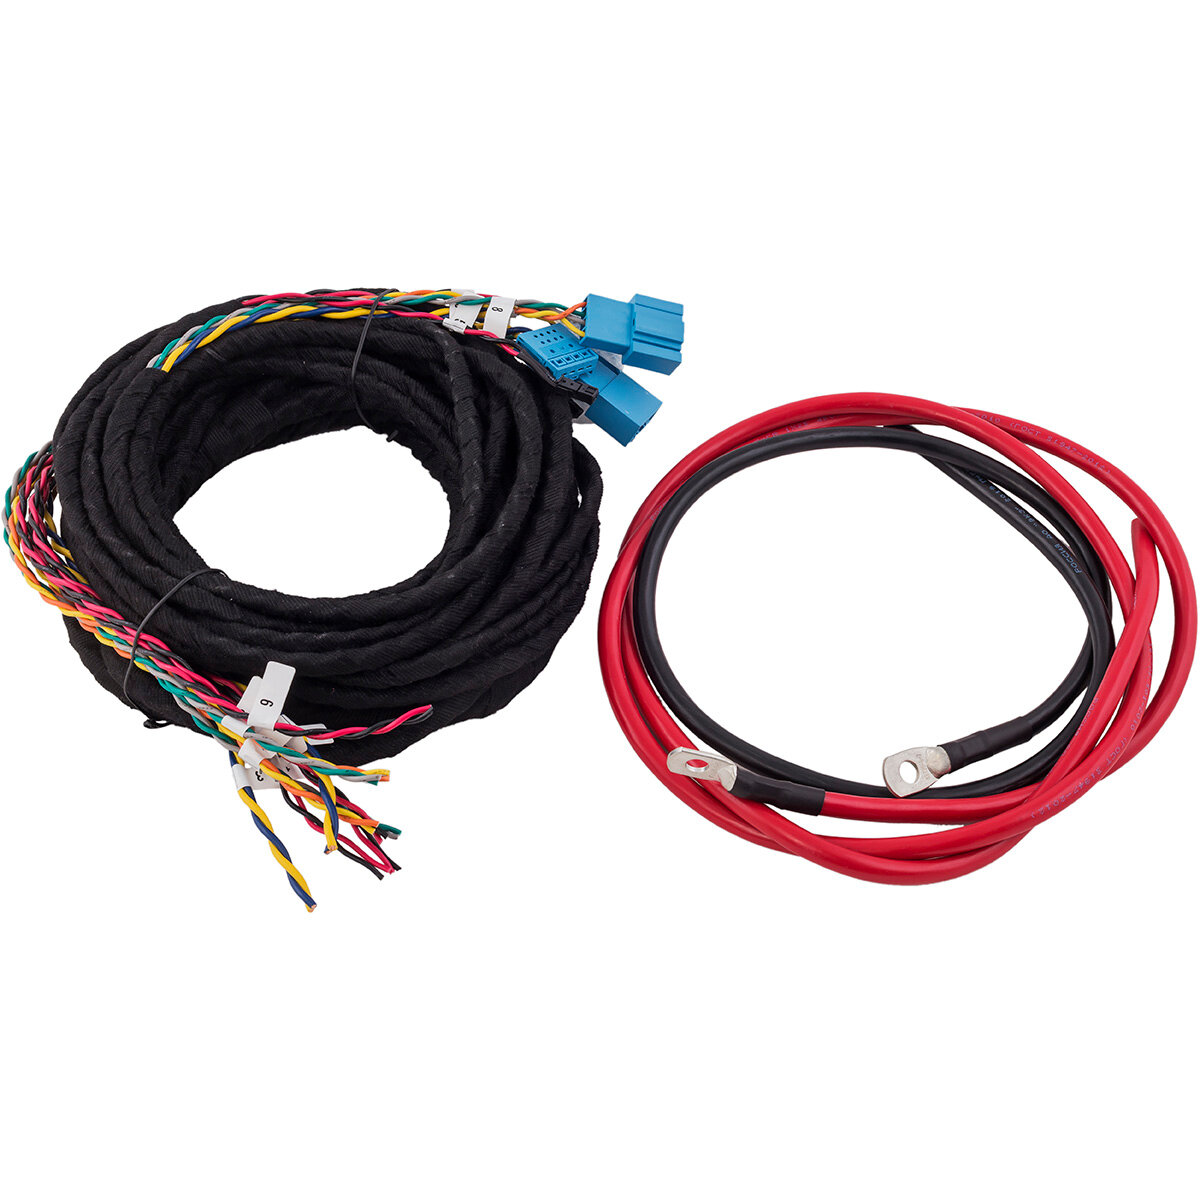 AMP by A.Vakhtin Cable Kit for BMW